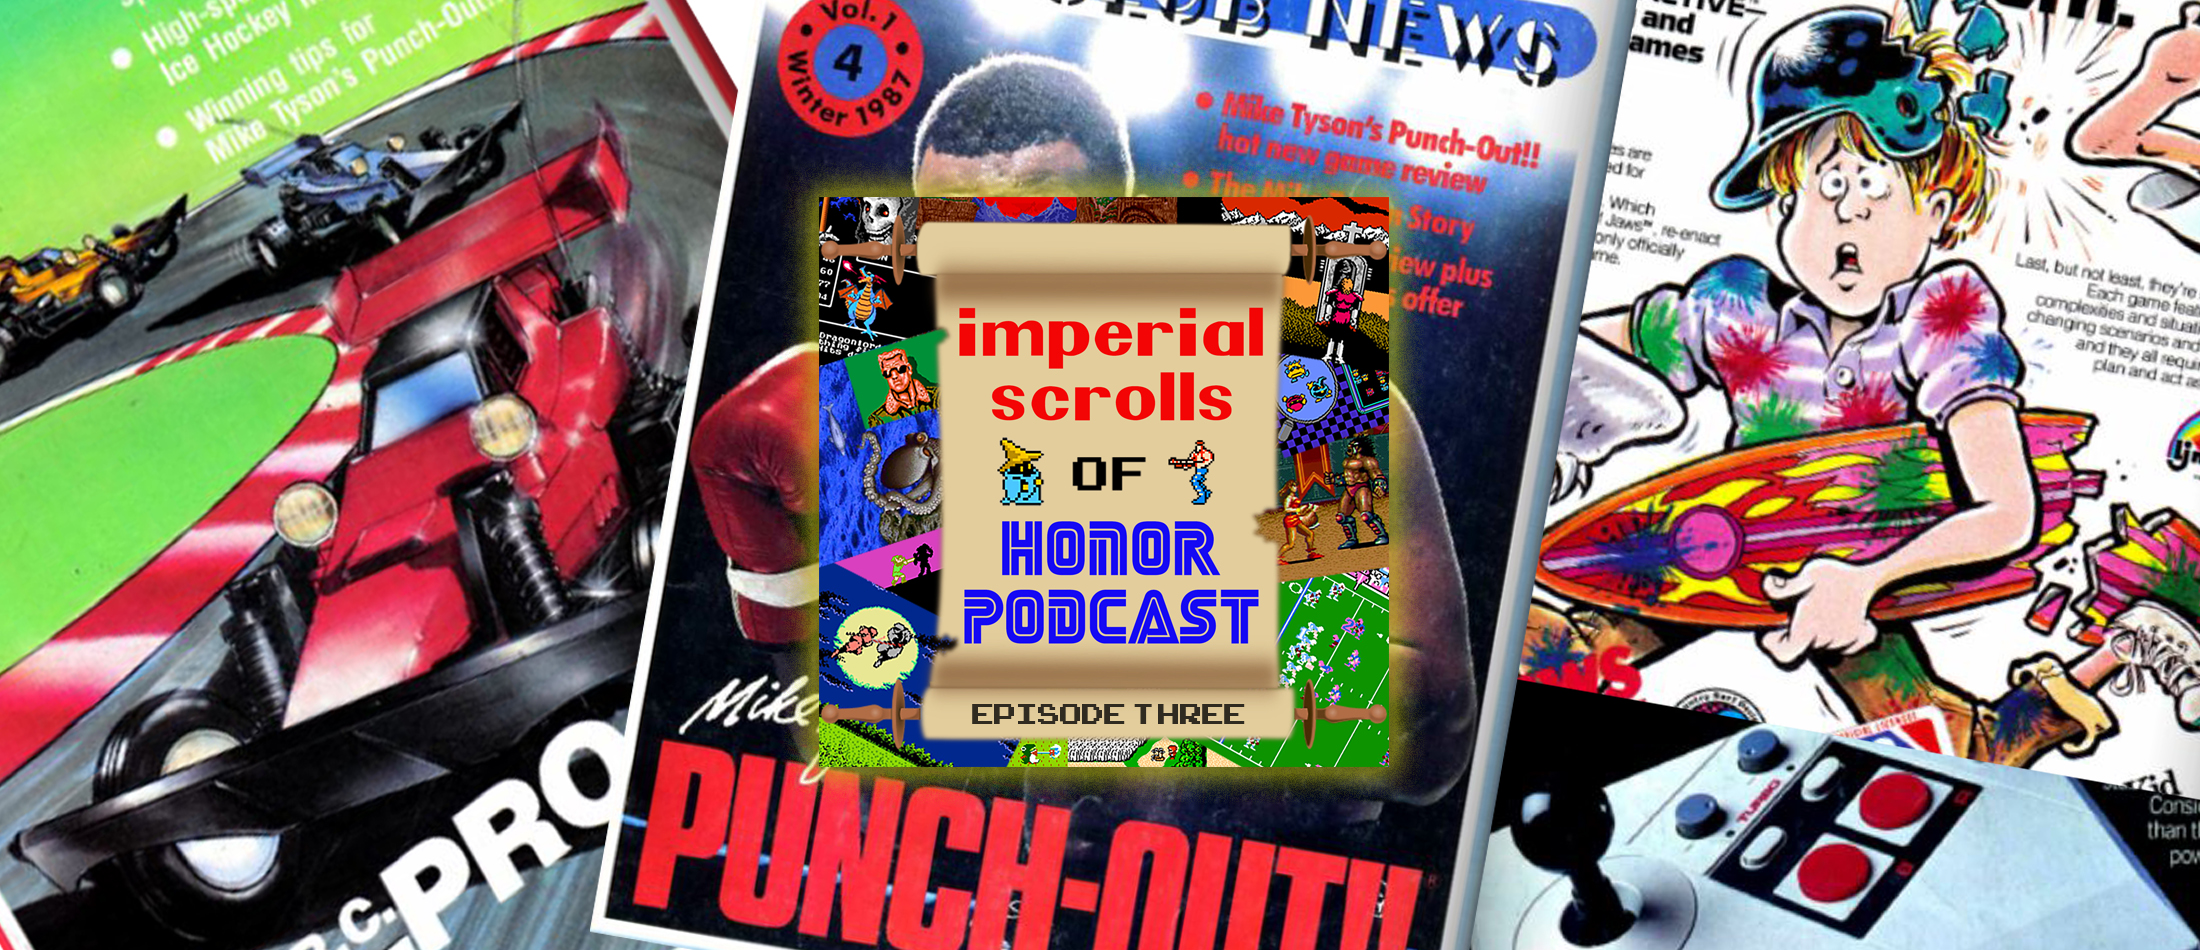 Imperial Scrolls of Honor Podcast - Episode 3 - Nintendo Fun Club News #4-5